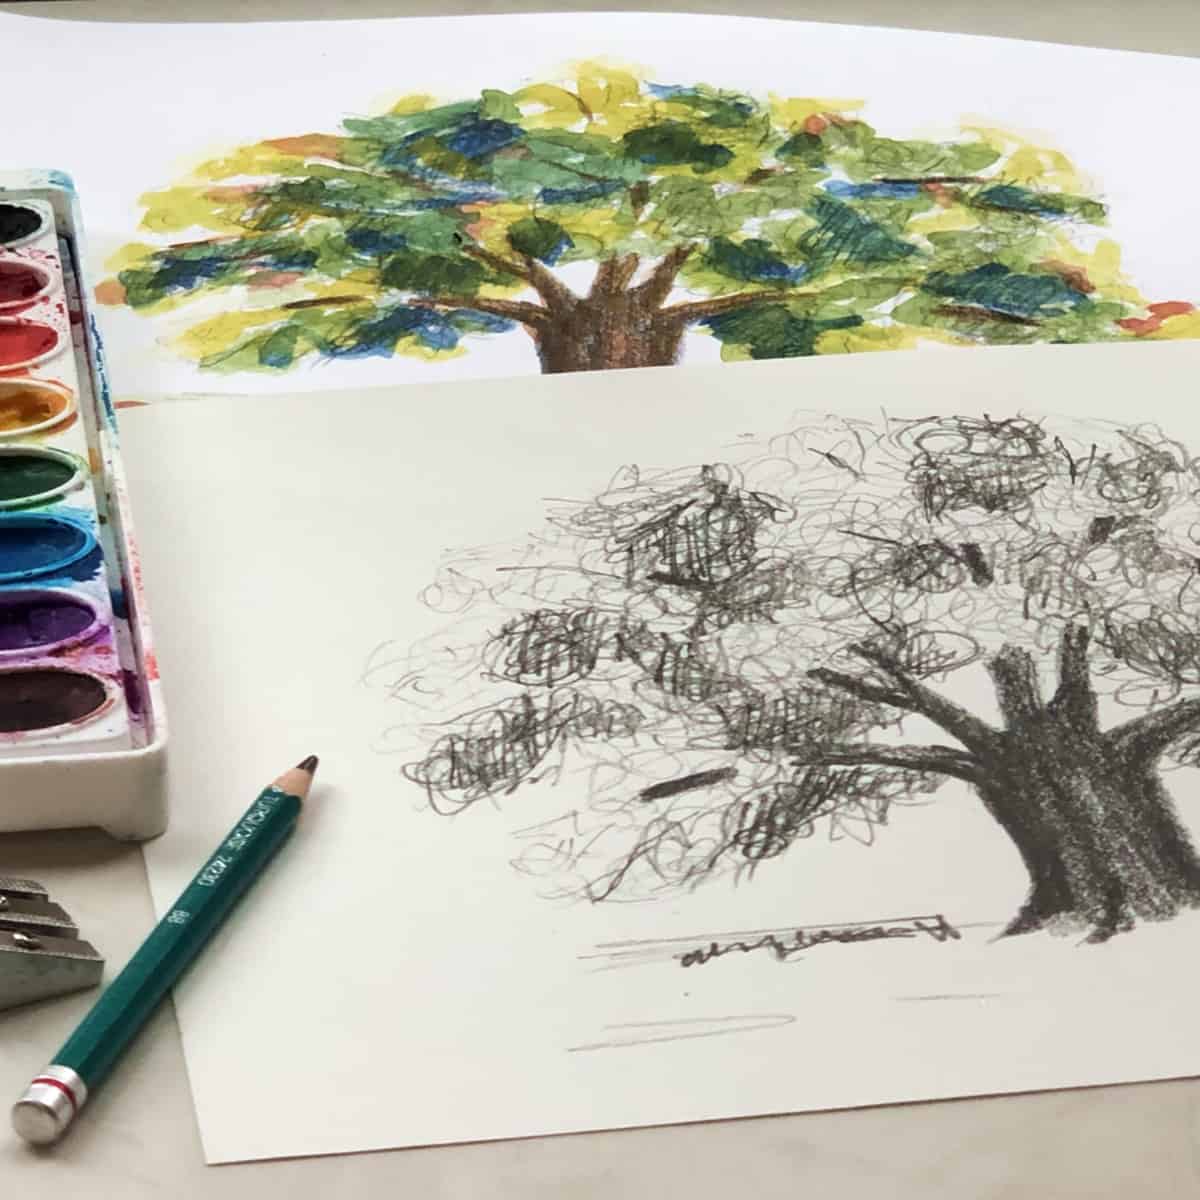 Sketch and watercolor painting of oak trees with a drawing pencil and paint set.